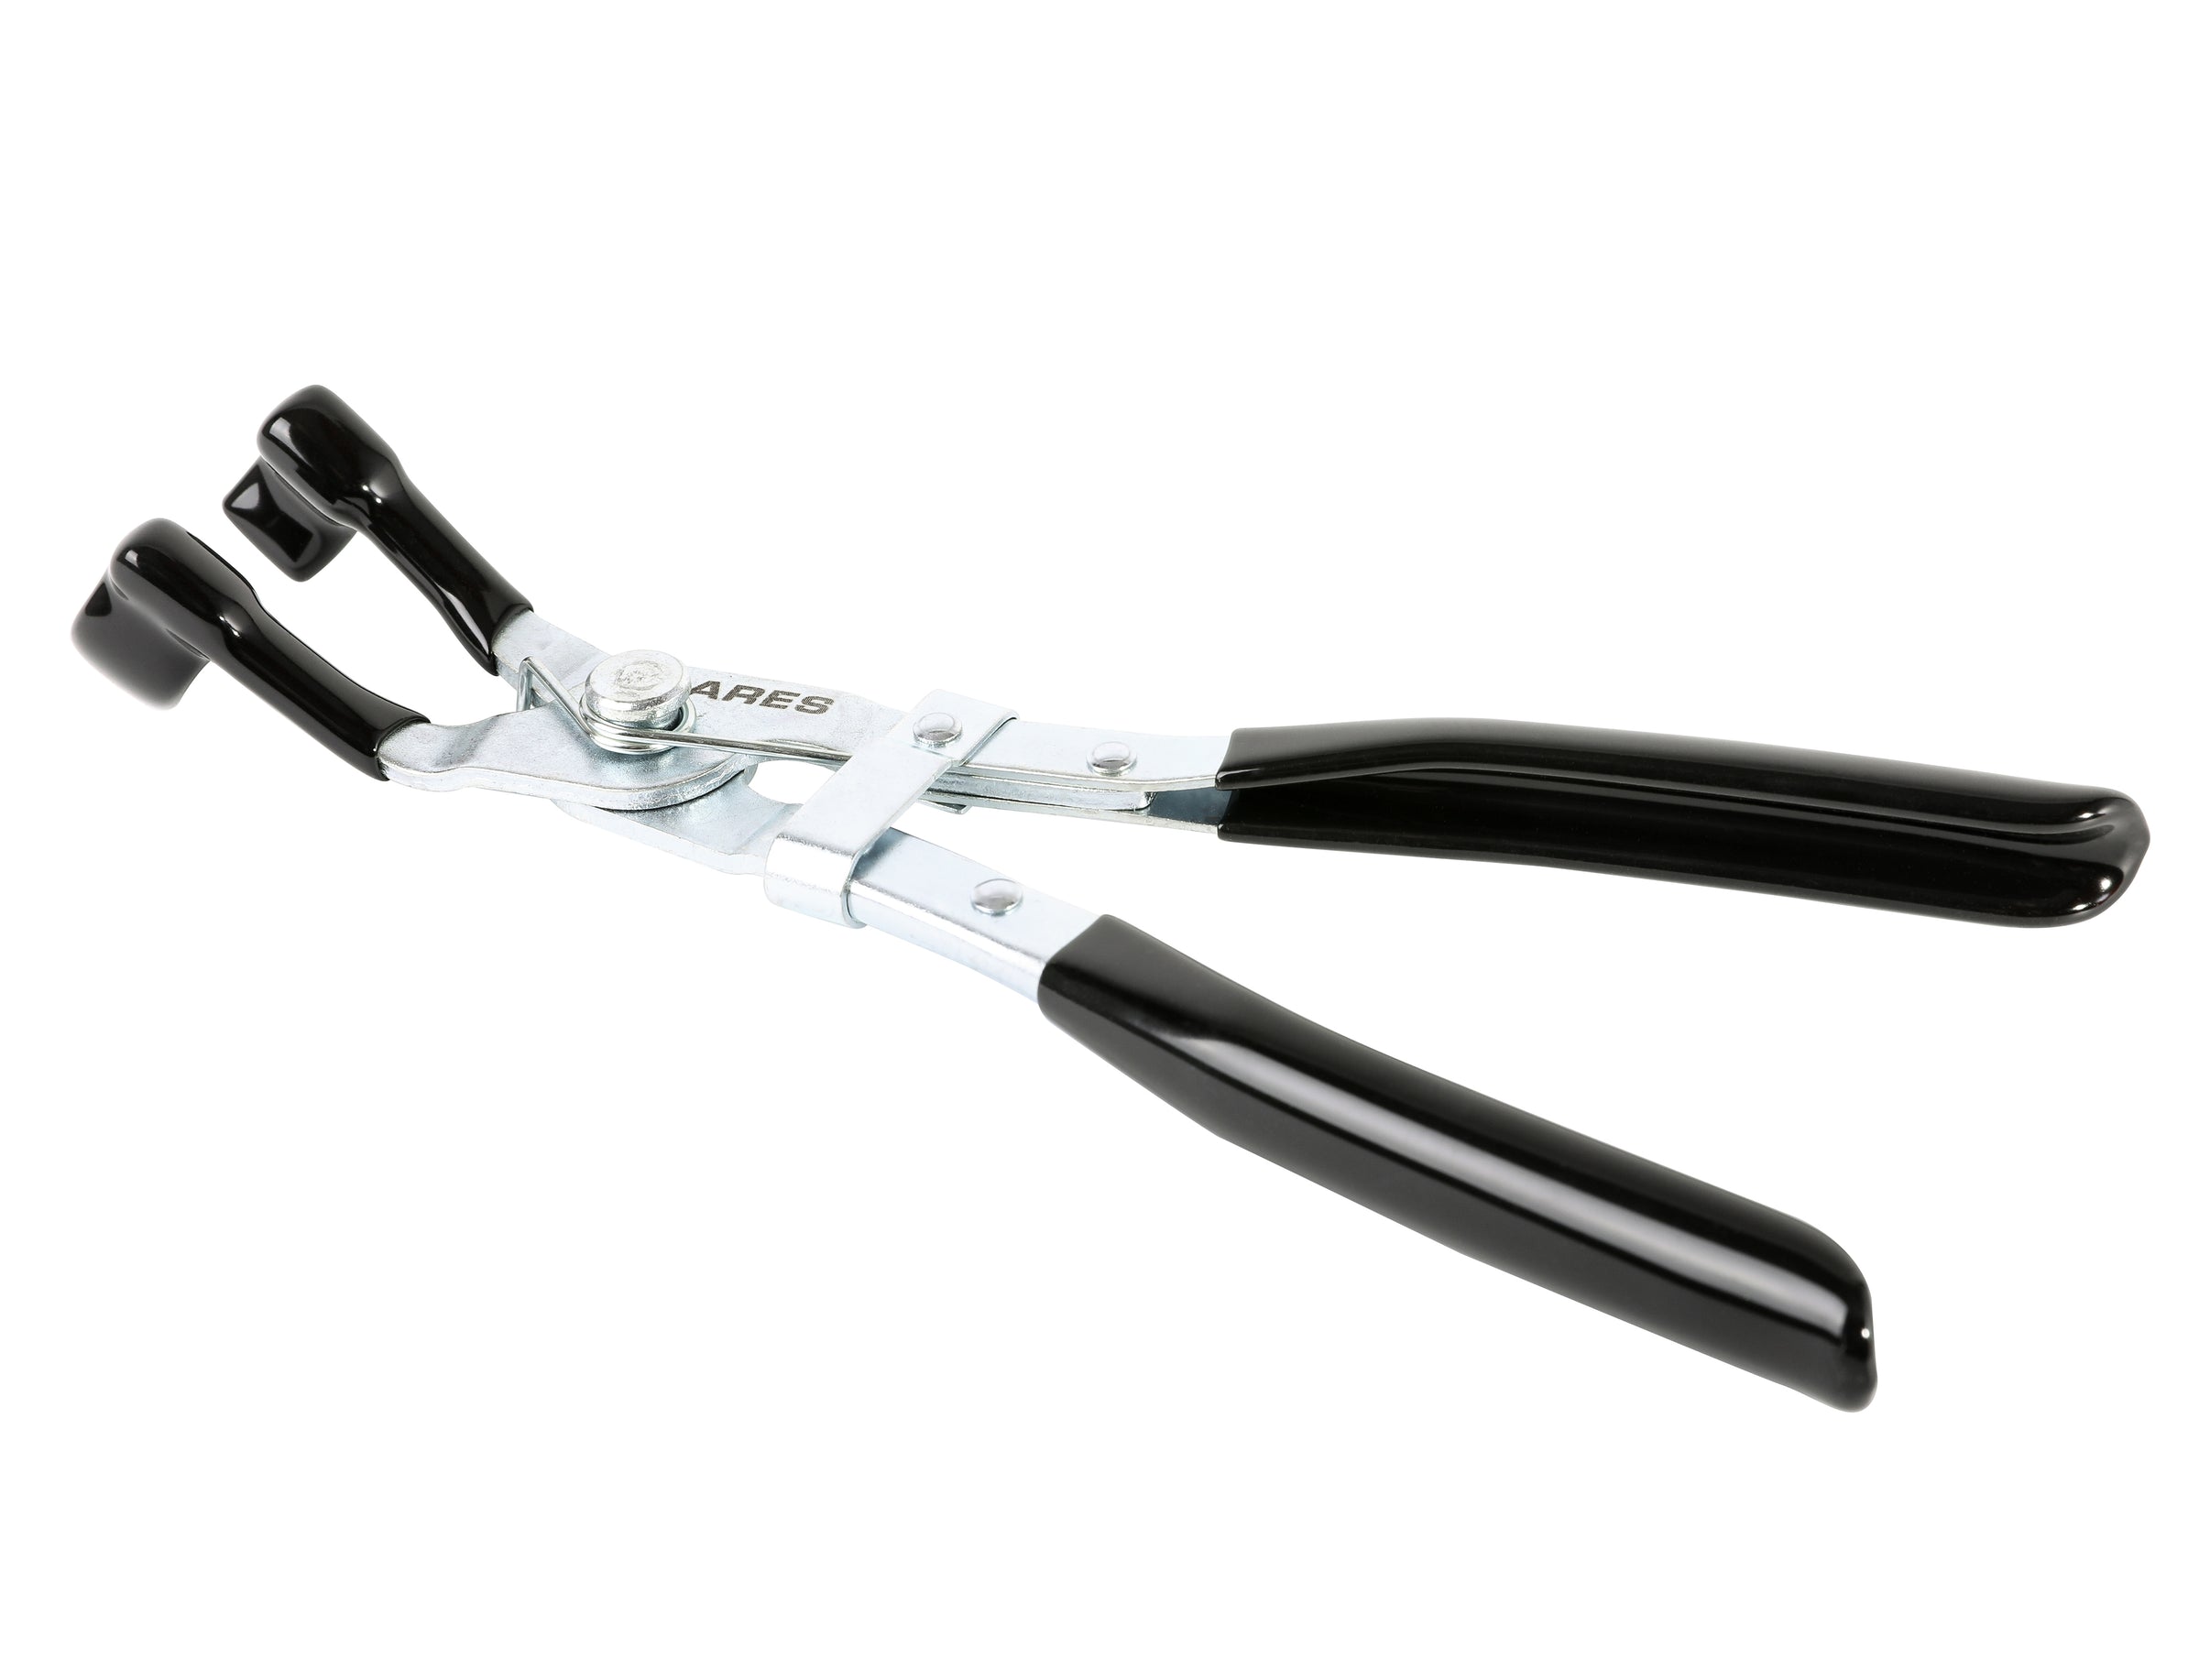 ELECTRICAL CONNECTOR DISCONNECT PLIERS - Product